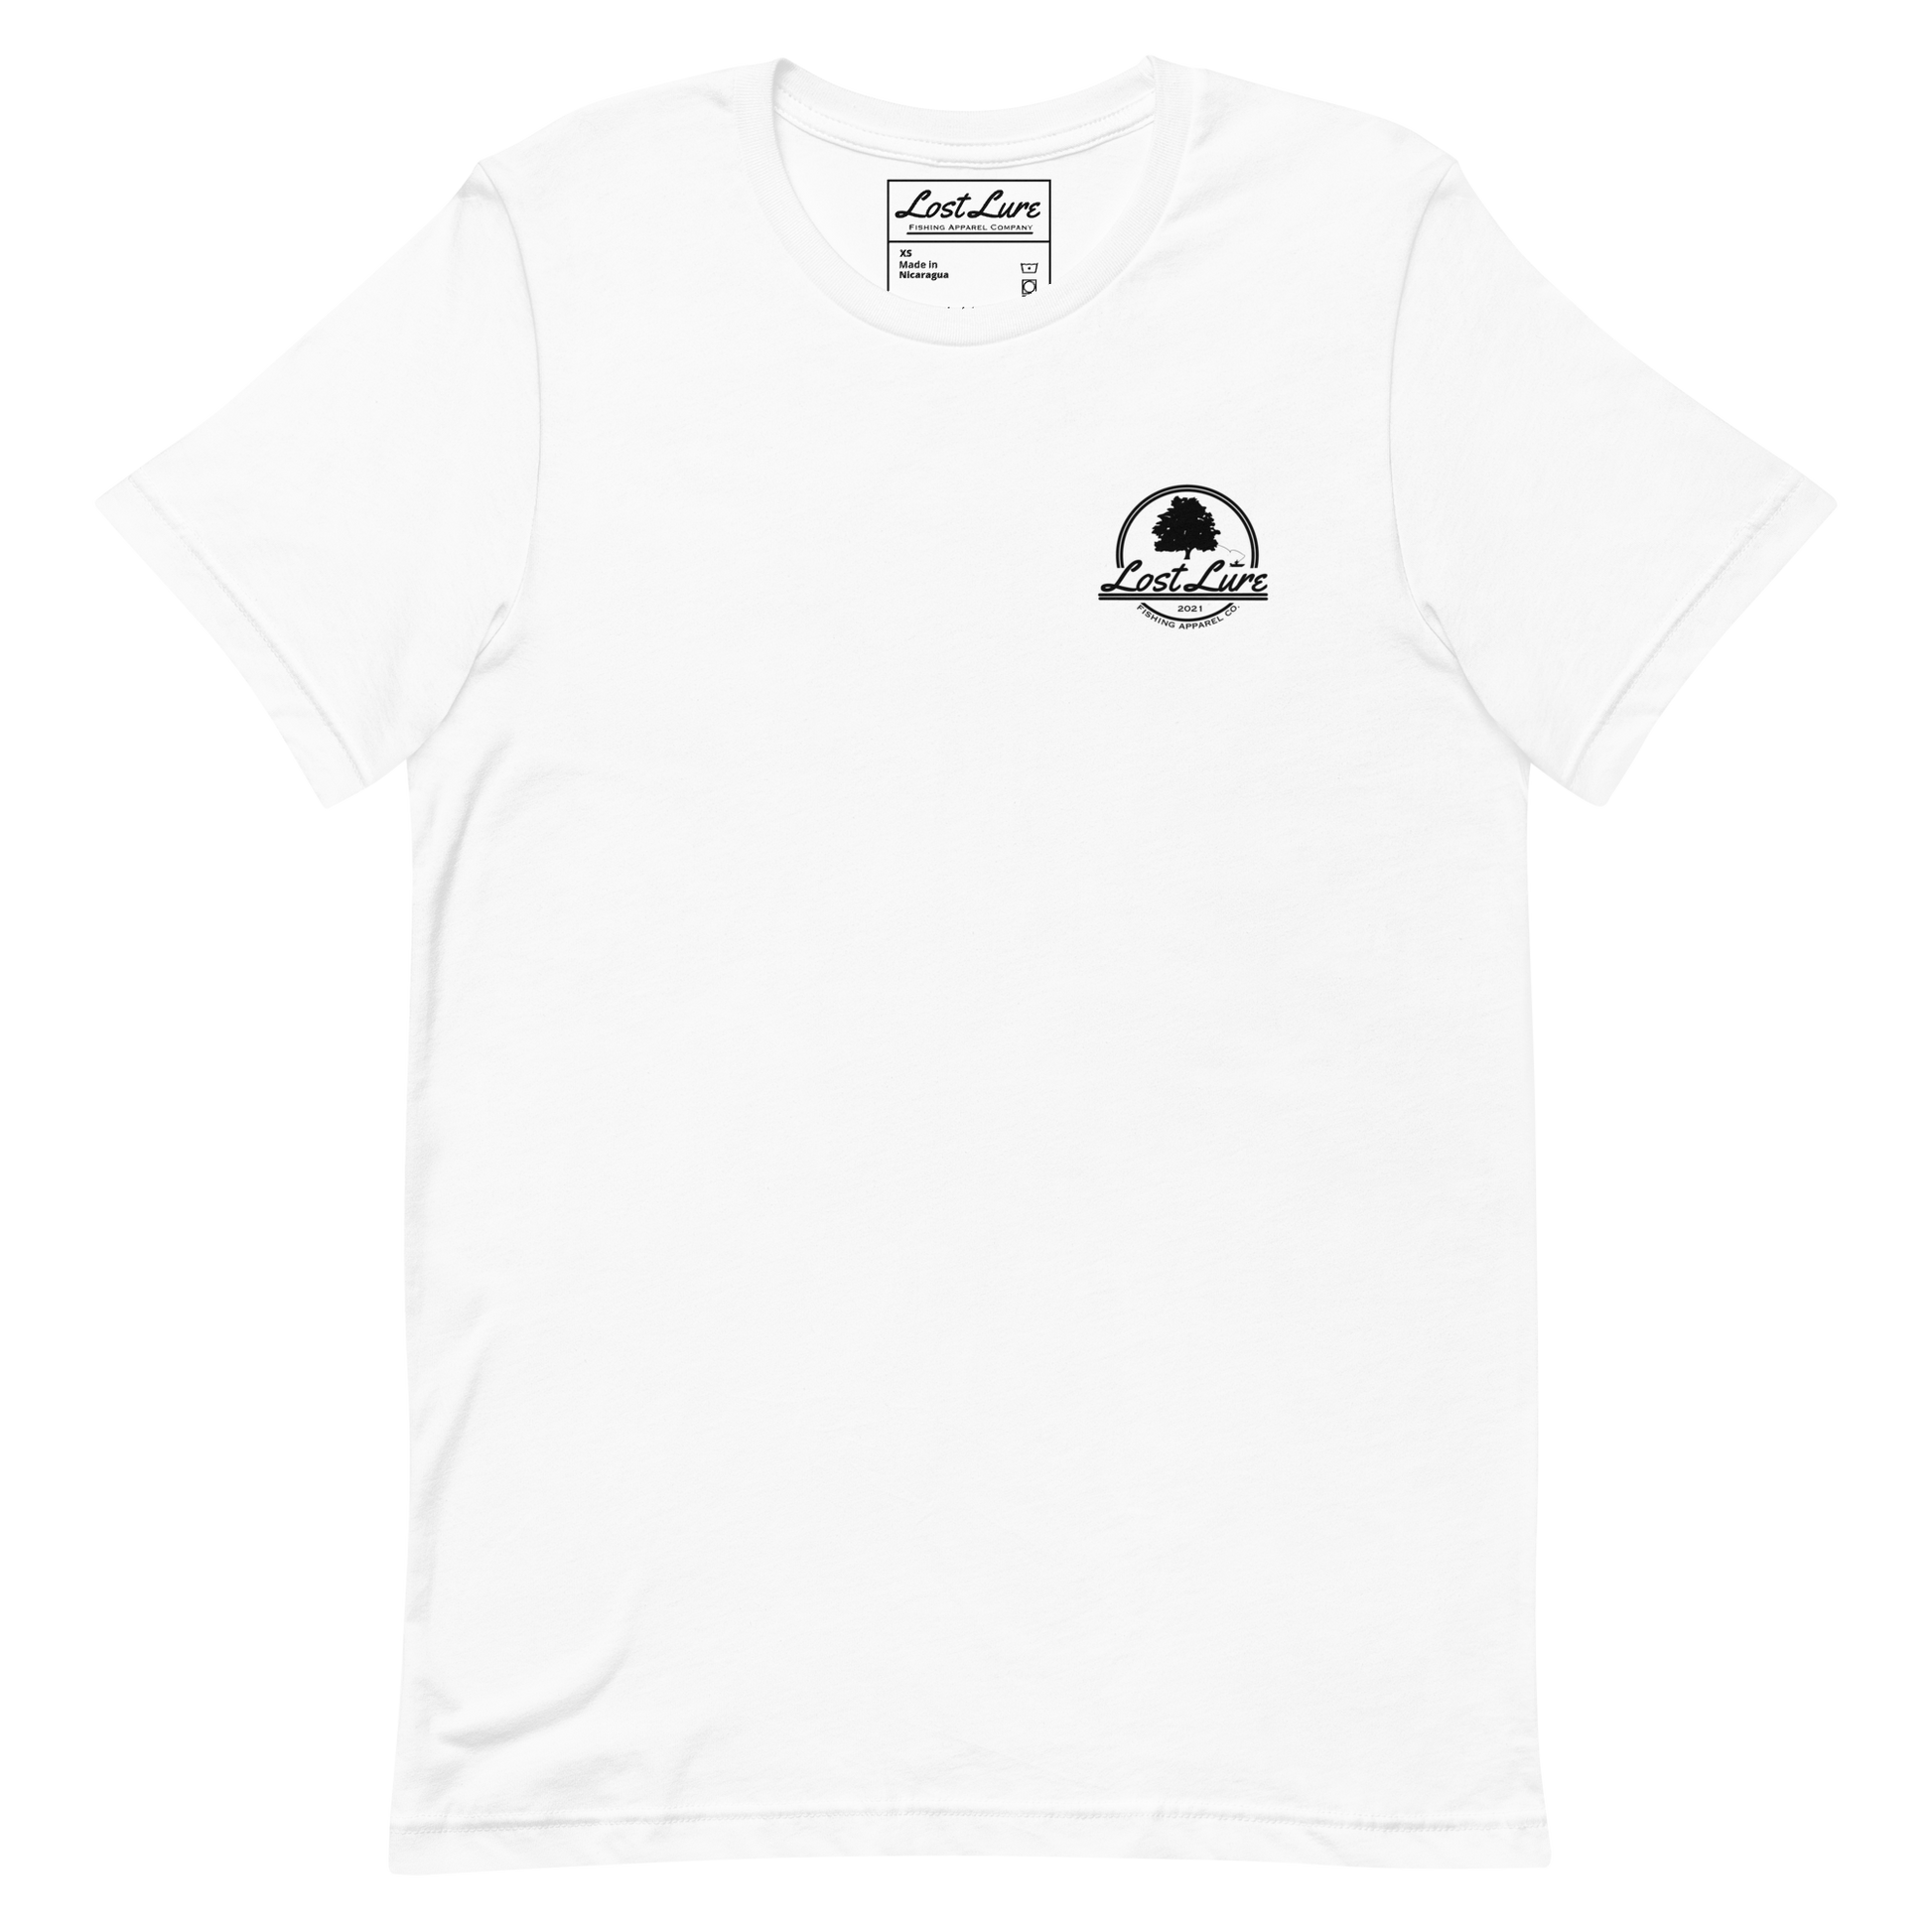 Cutthroat Trout fishing shirt. It’s an American traditional style design with a cutthroat trout and a dagger. The shirt reads Cutthroat trout, est. 2021, lost lure fishing apparel company. The front of the shirt has the lost lure logo. White fishing shirt, front side